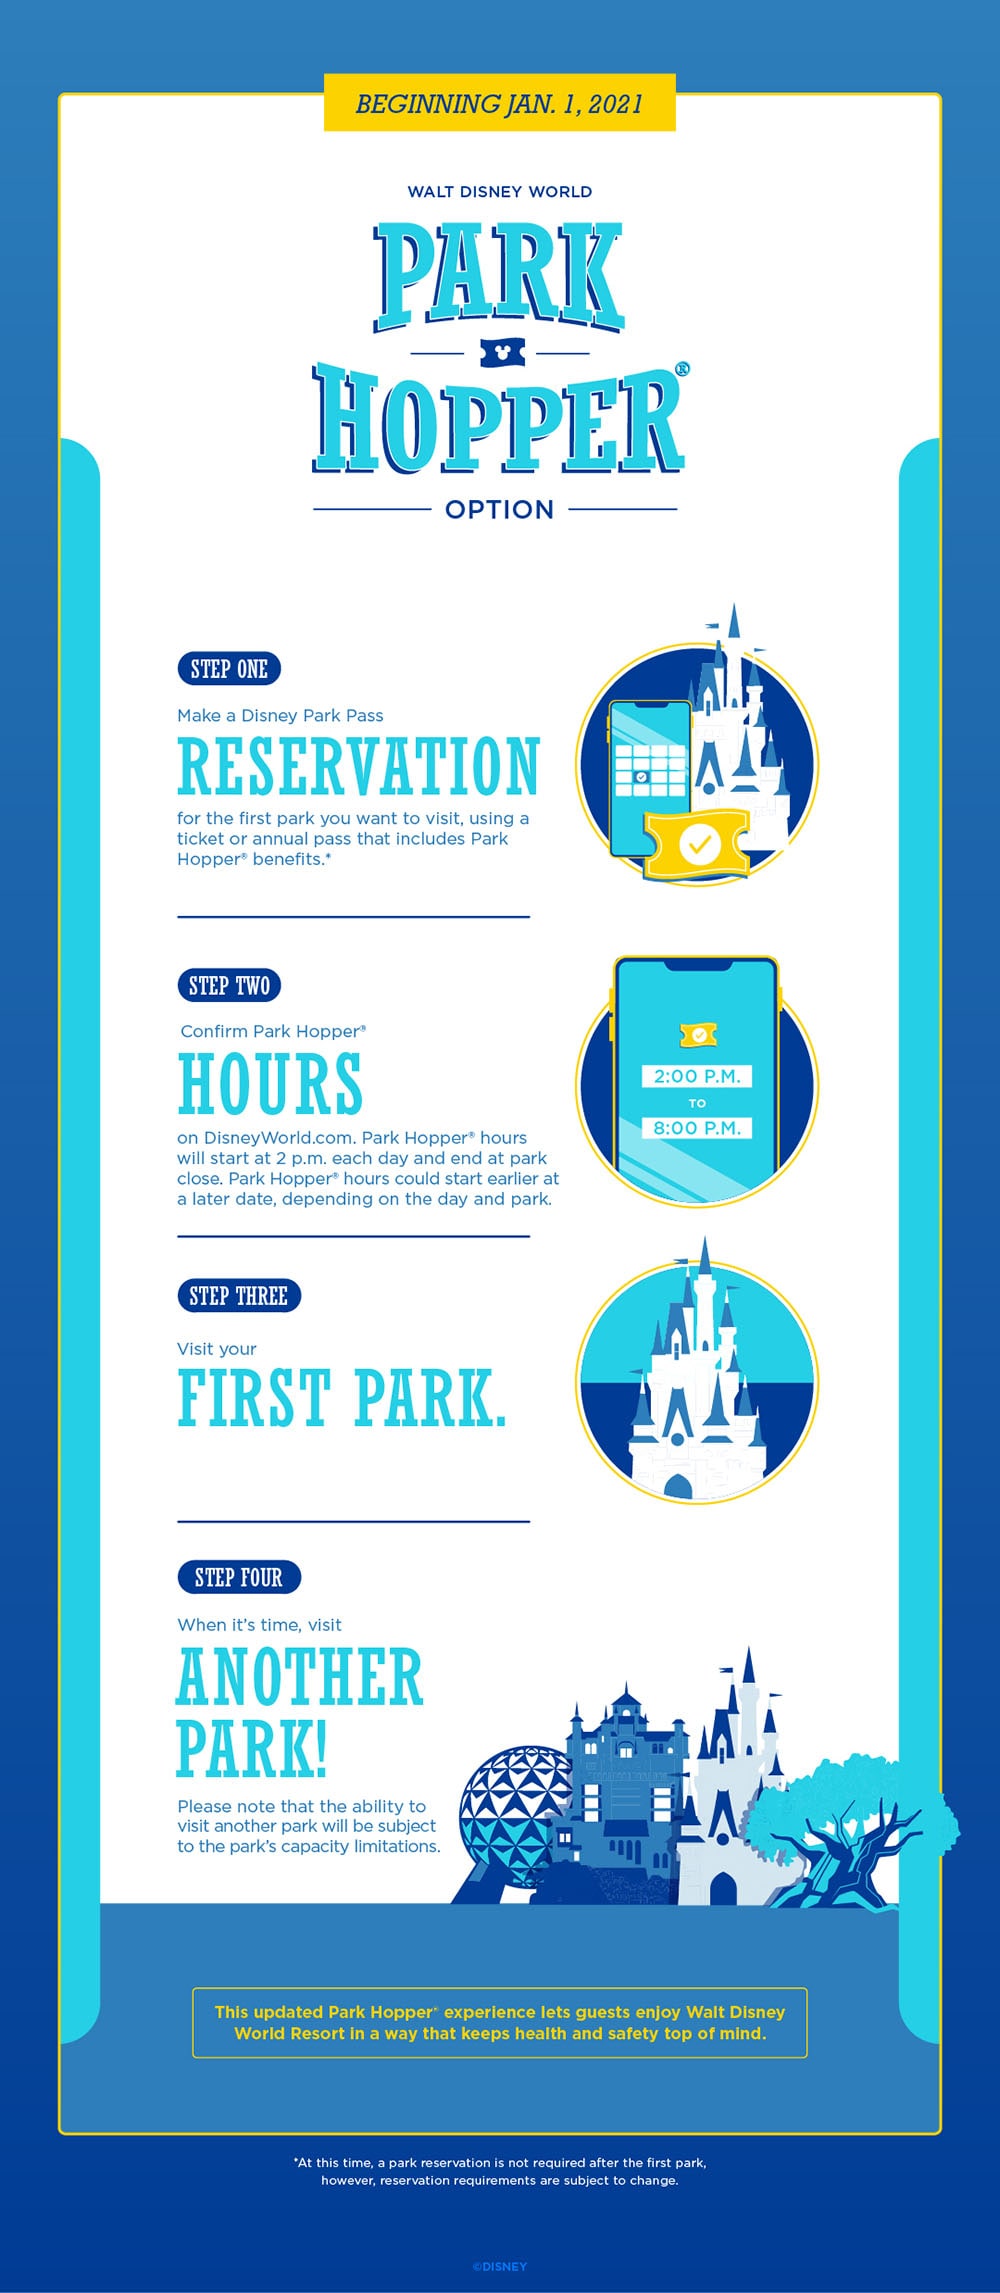 The Top 3 Reasons To Get The Park Hopper Option At Walt Disney World